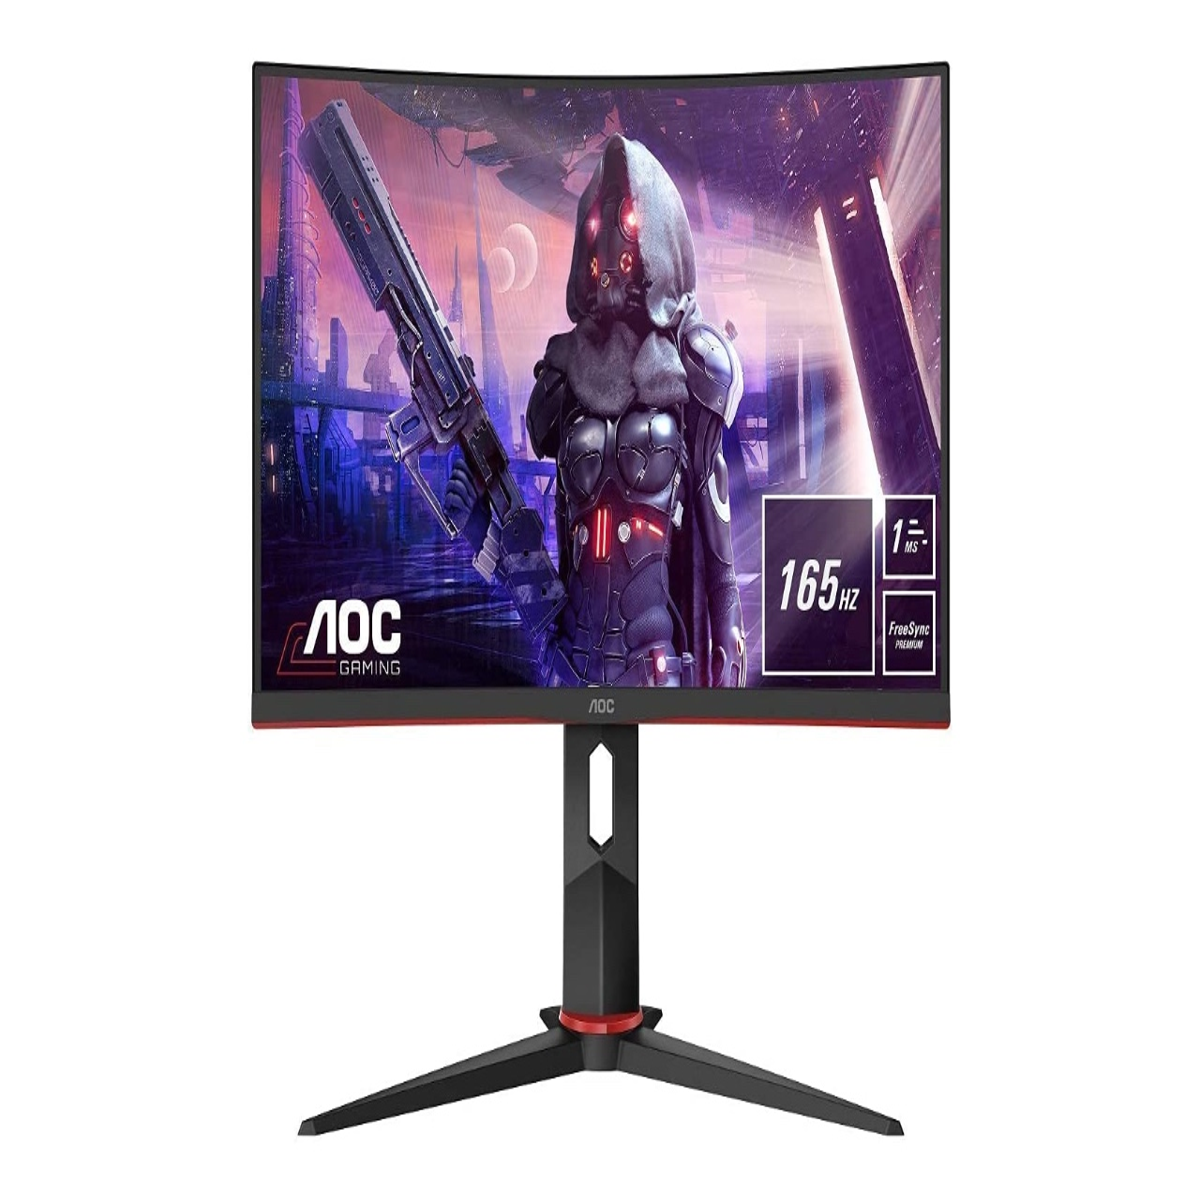 This curved full HD gaming monitor from AOC, with a 165Hz refresh